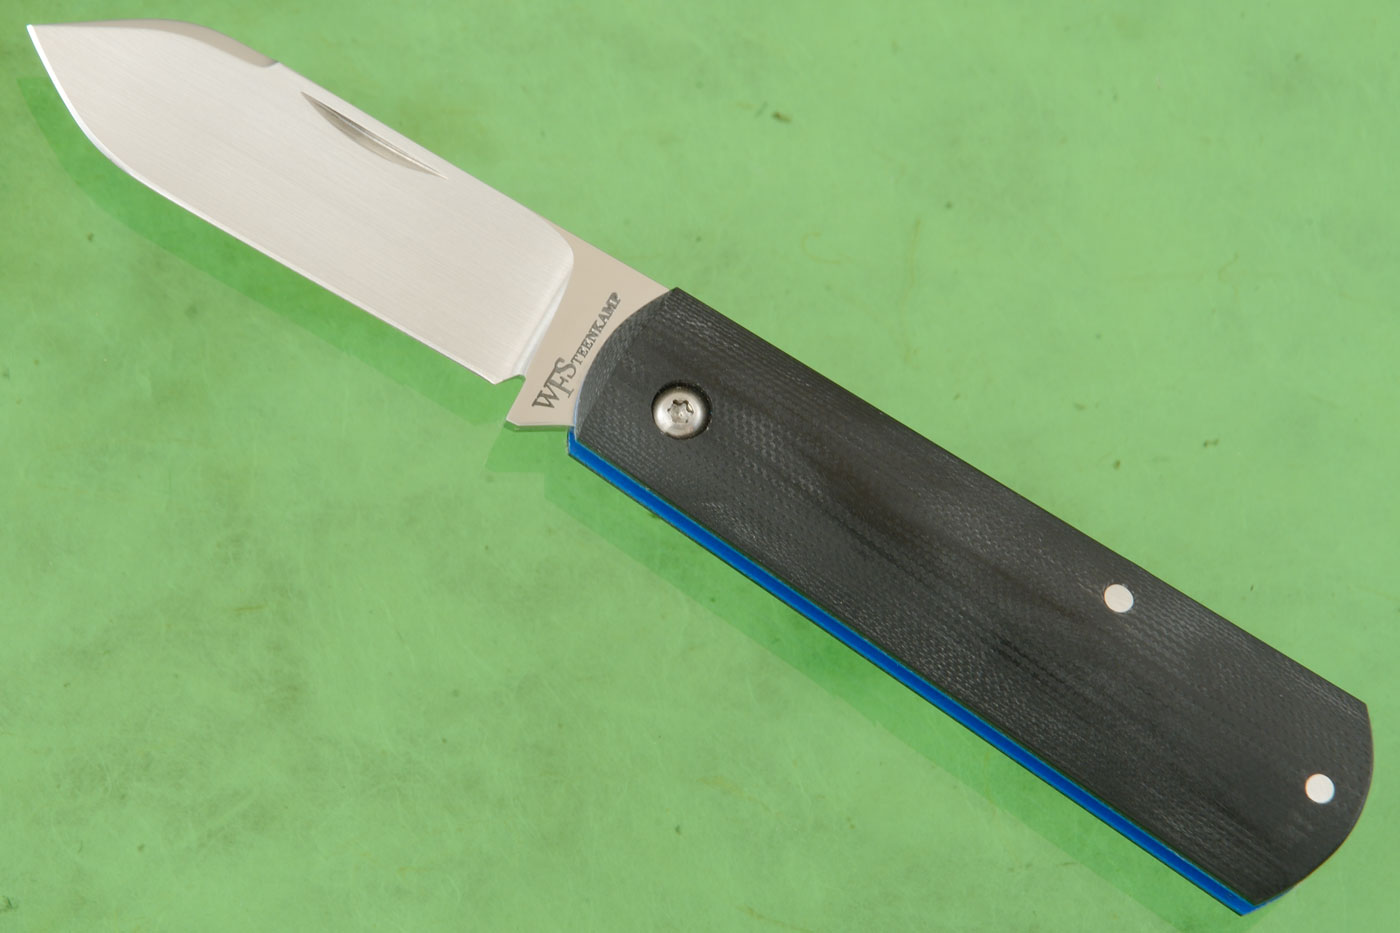 Barlow Friction Folder with Black and Blue G10